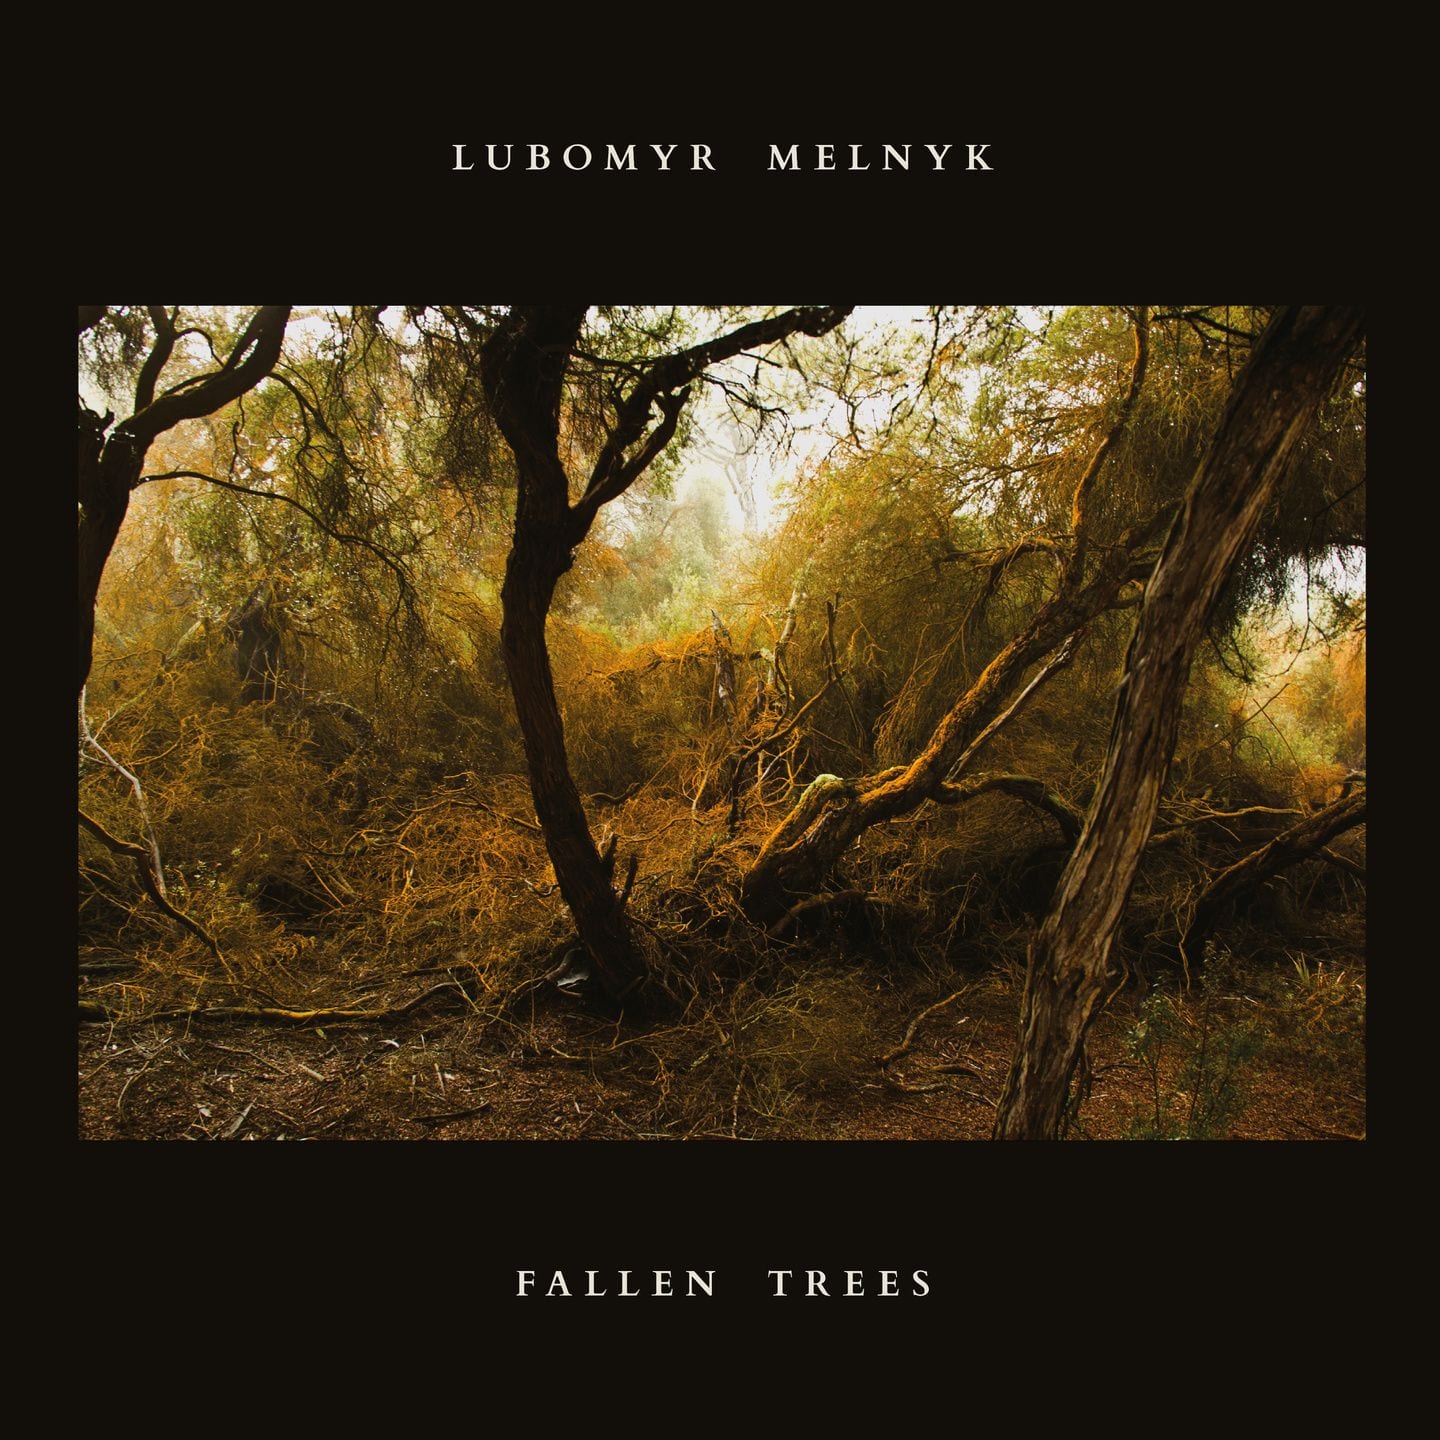 Lubomyr Melnyk’s ‘Fallen Trees’ Is a Thing of Uncommon Beauty